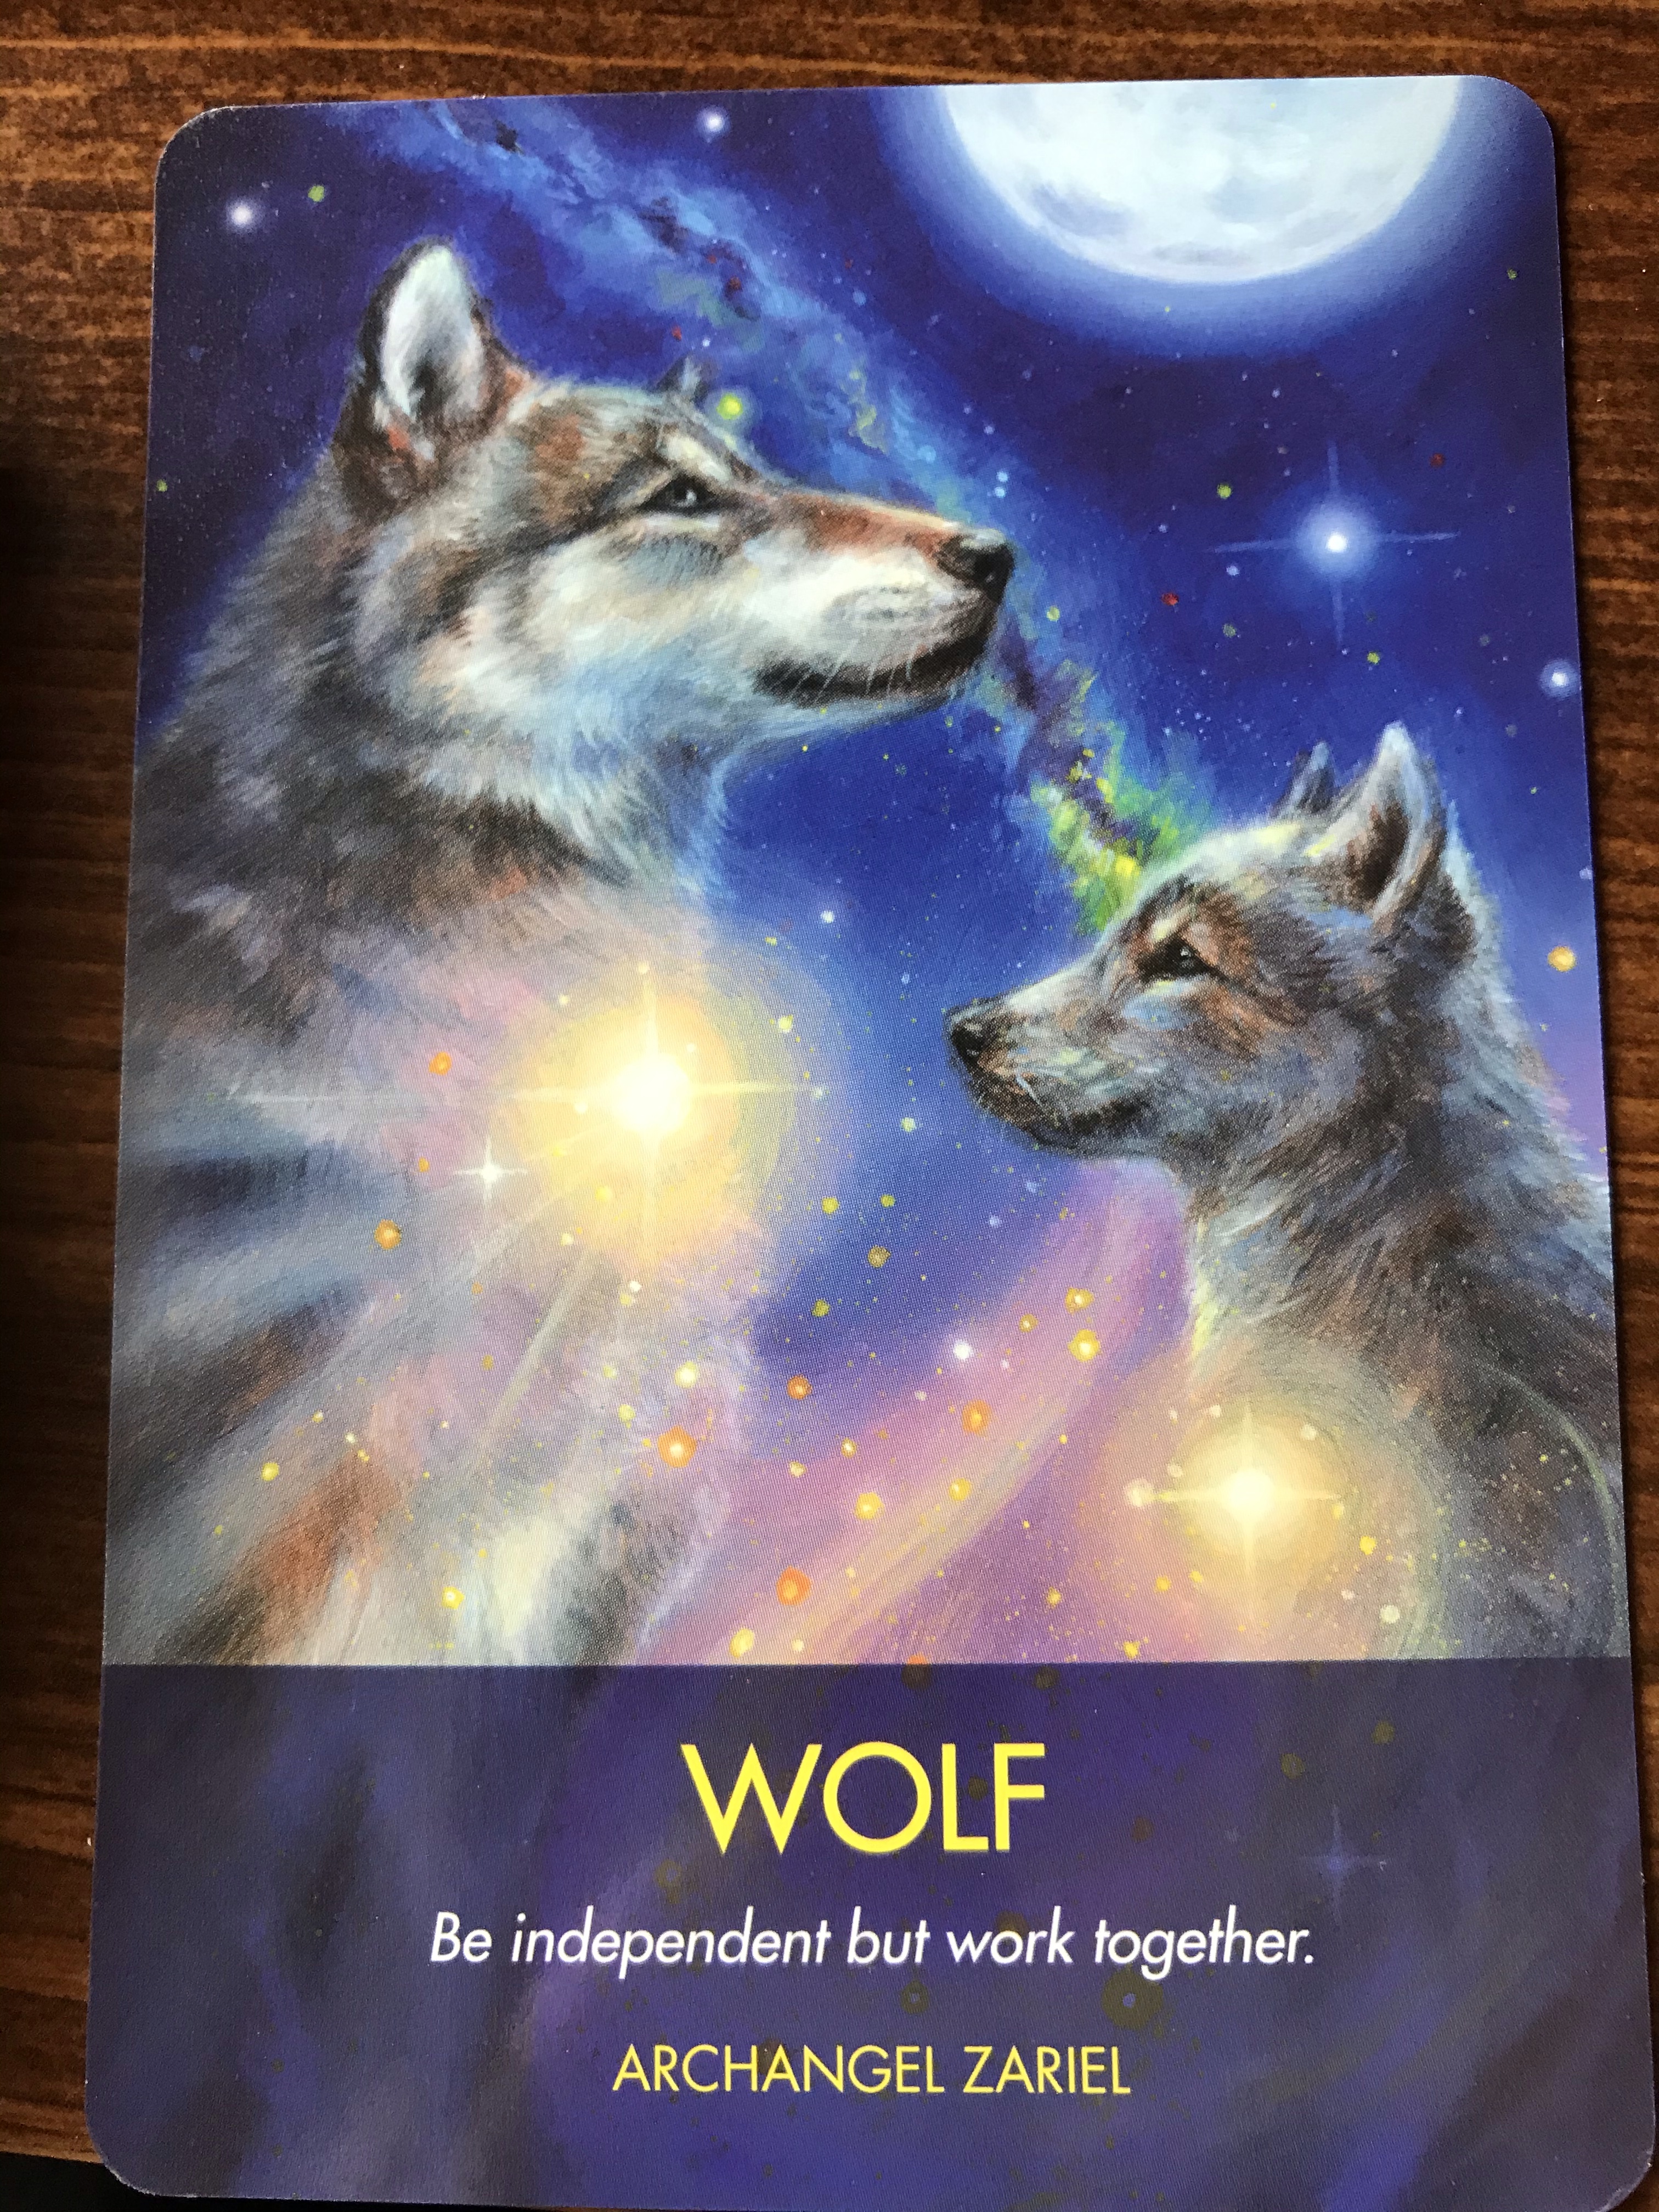 The Wolf – “Be independent but work together” – The Self-Help Whisperer®